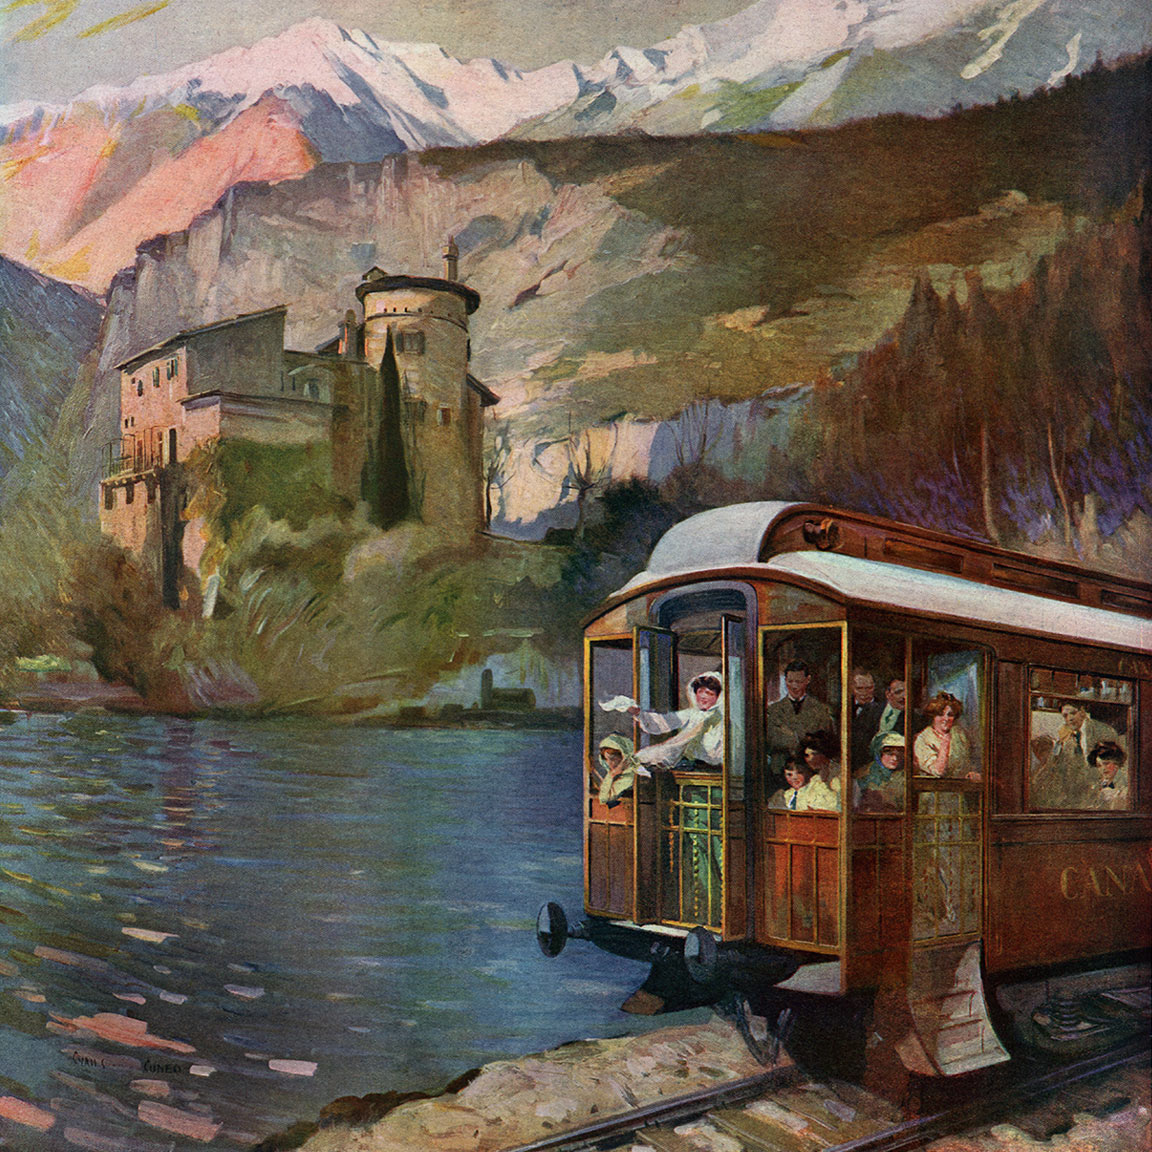 Summer in Tyrol, Cyrus Cuneo | The Illustrated London News, 08-06-1912 (collectie Arjan den Boer)